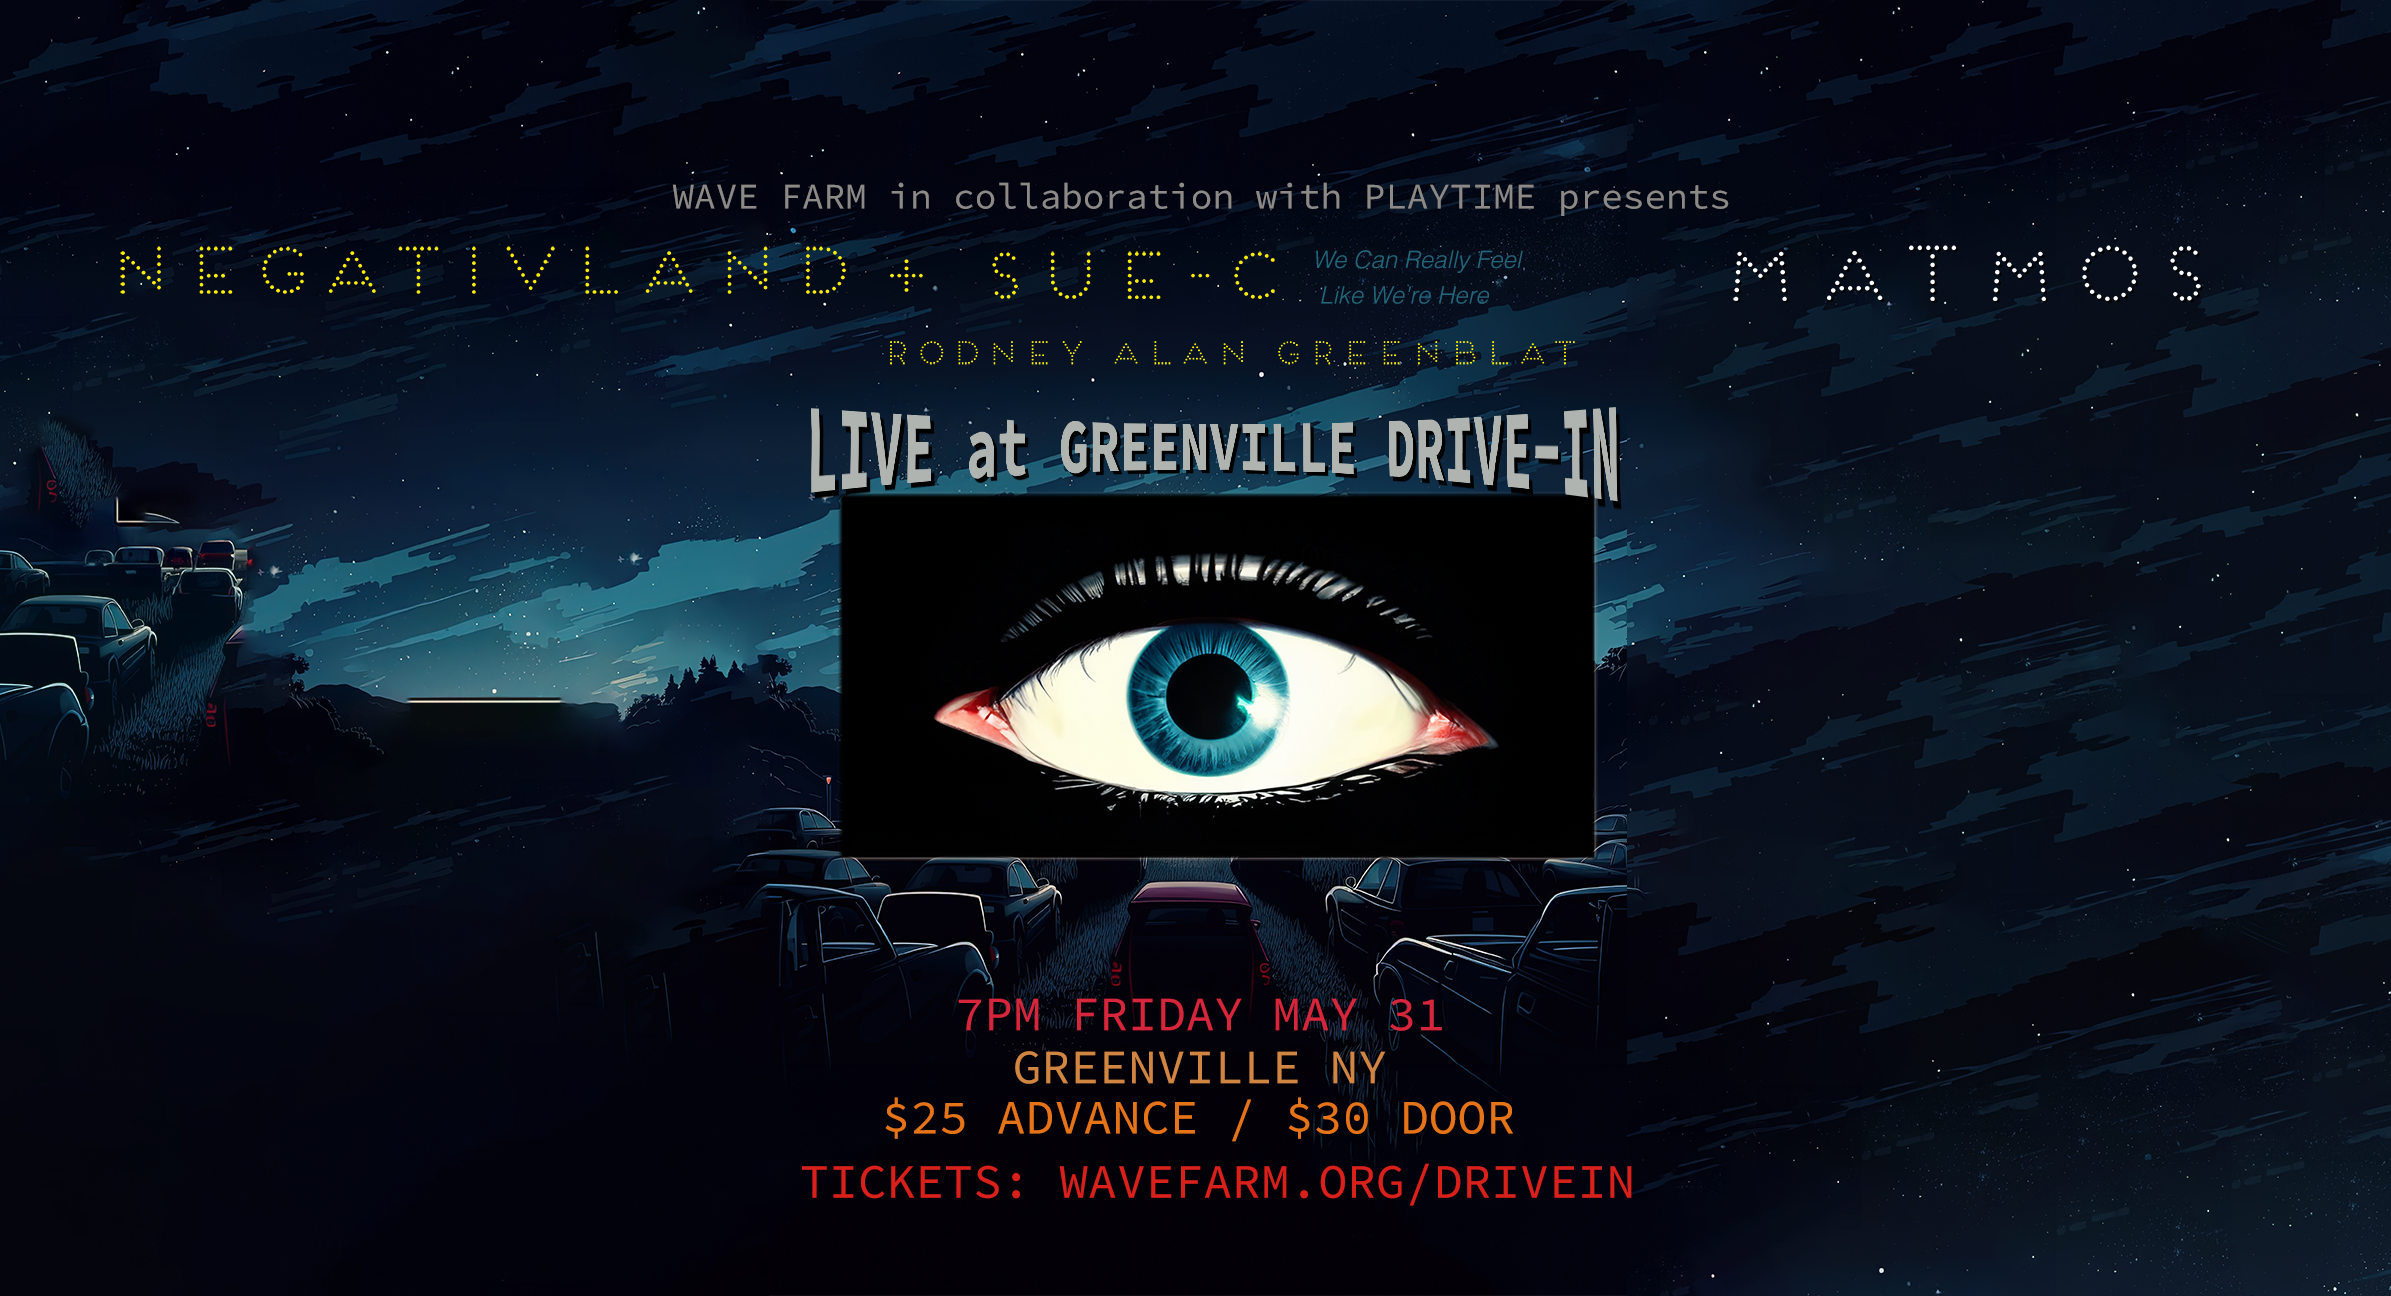 dark blue flyer for Negativland, Matmos, Rodney Alan Greenblat at the Greenville Drive-in